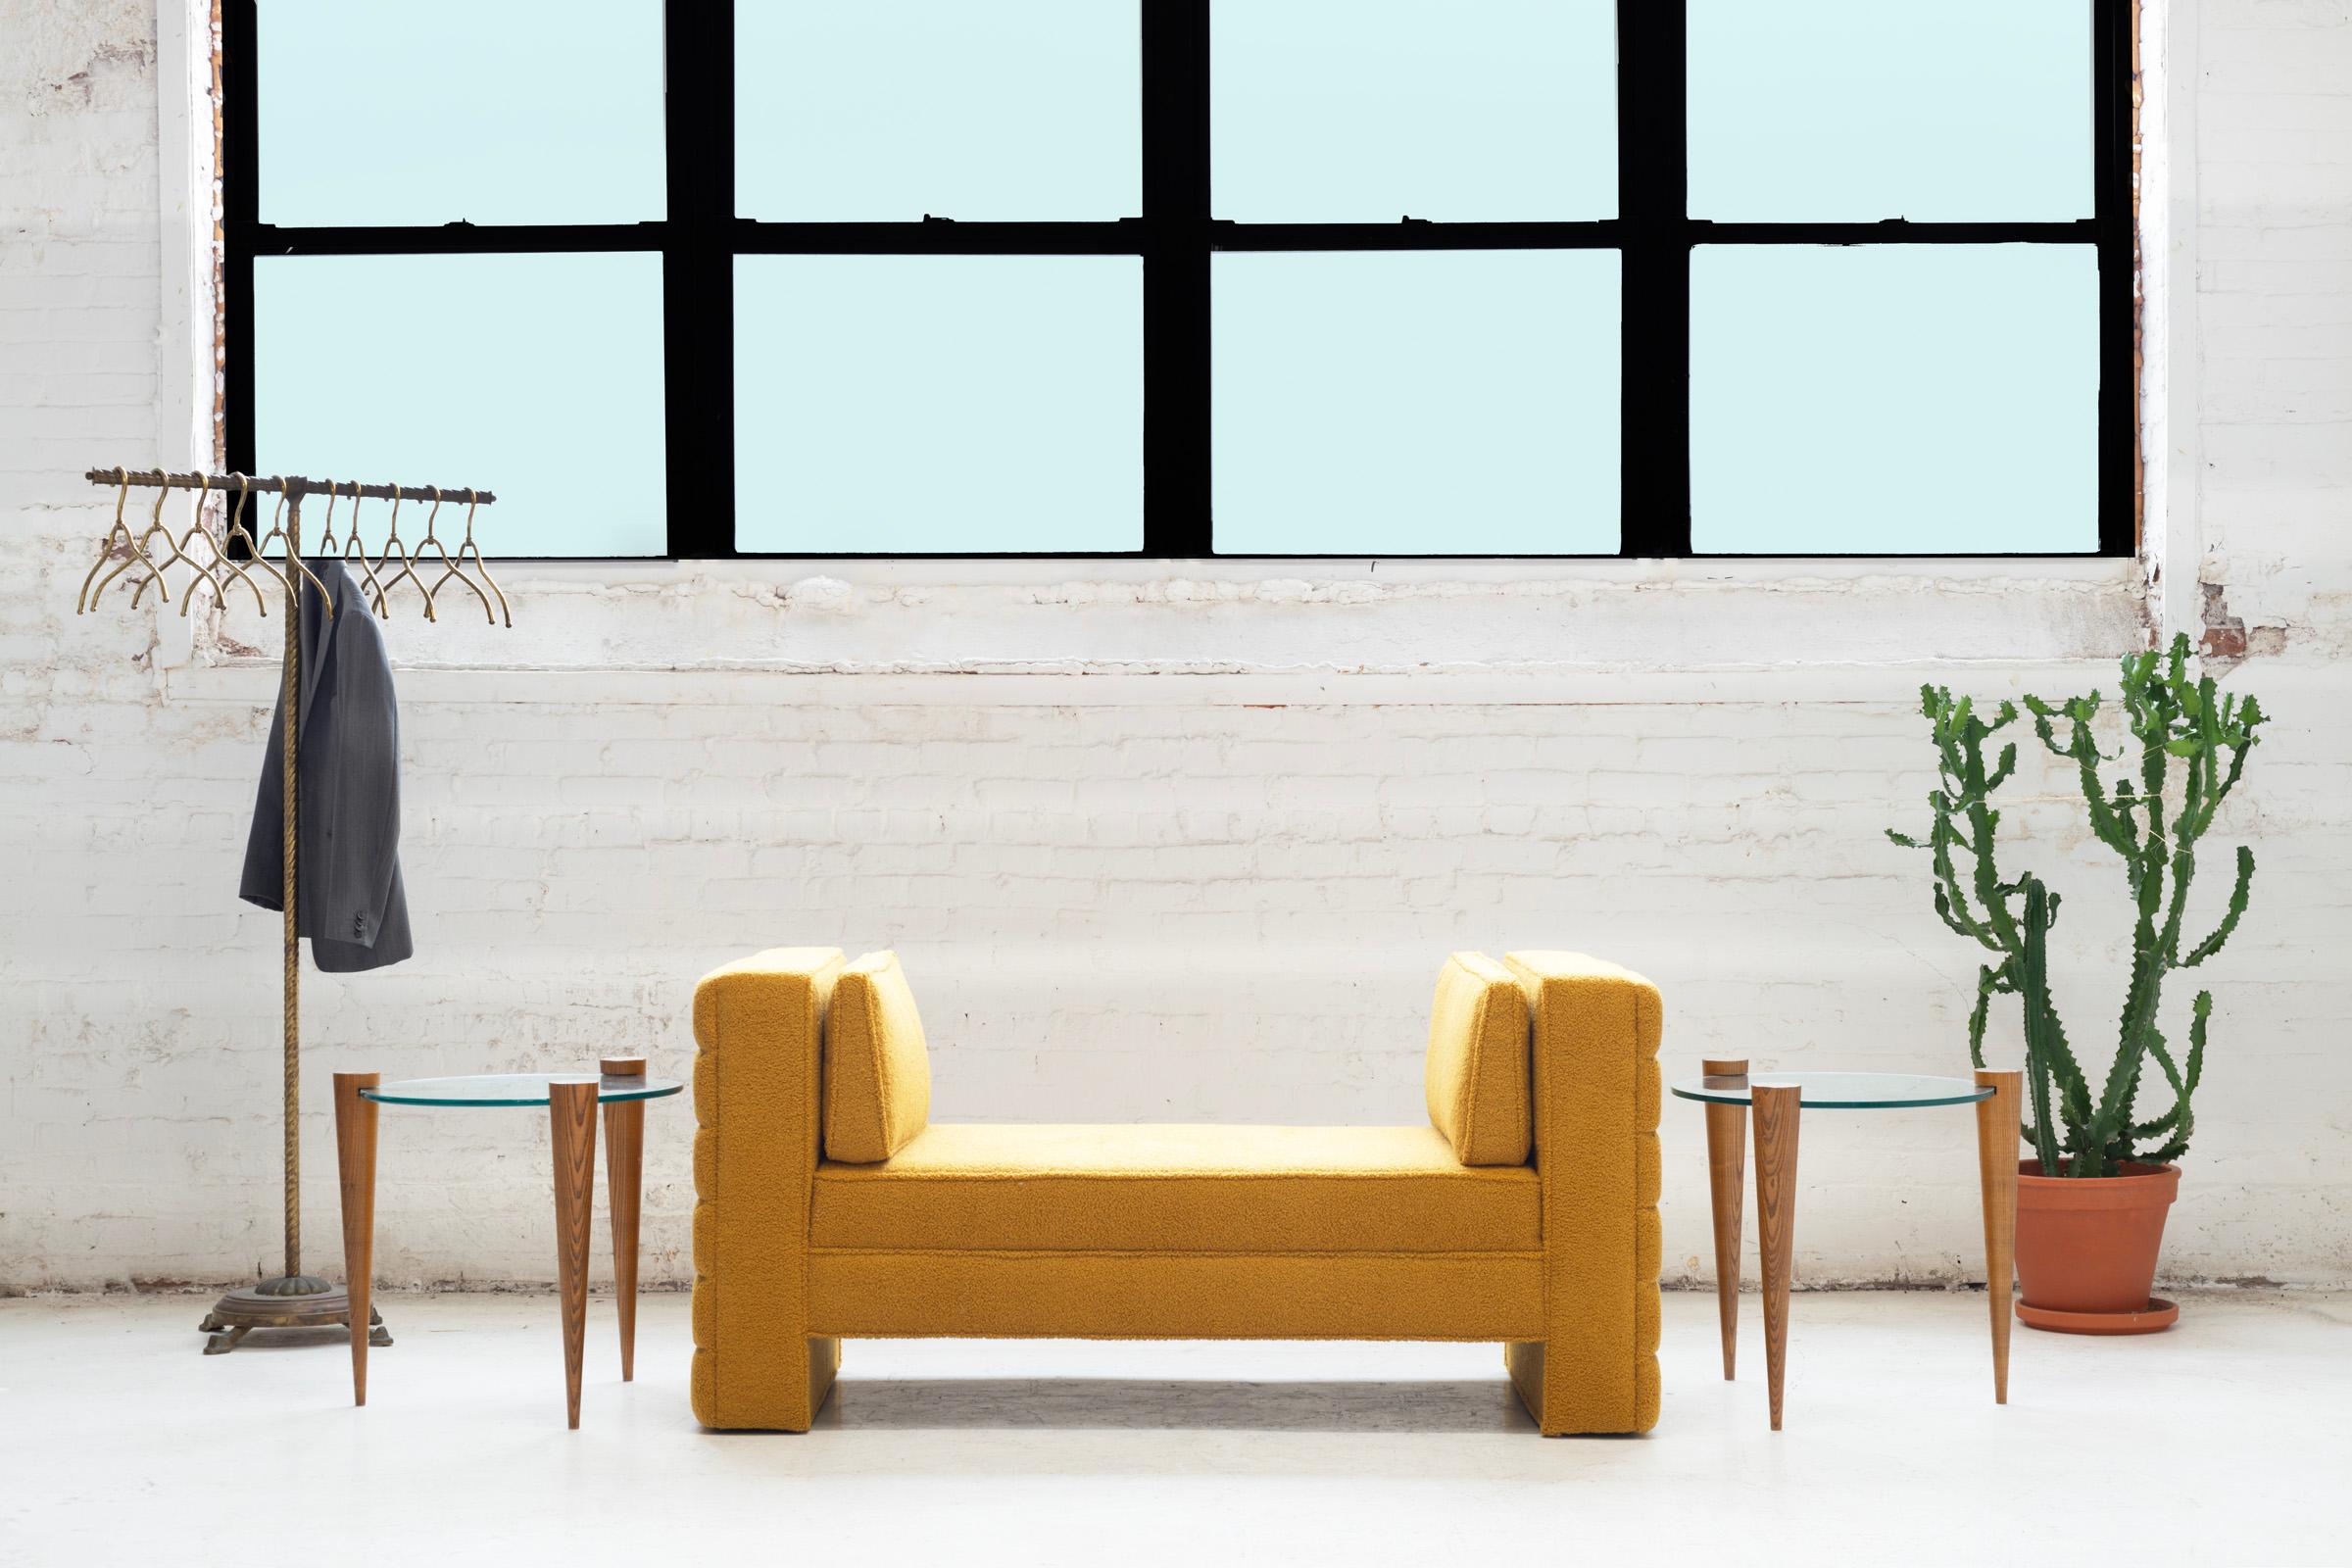 Introducing the Ovunque Bench by Nicholas Wolfe, a masterpiece in simplicity and sophistication. Its name, 